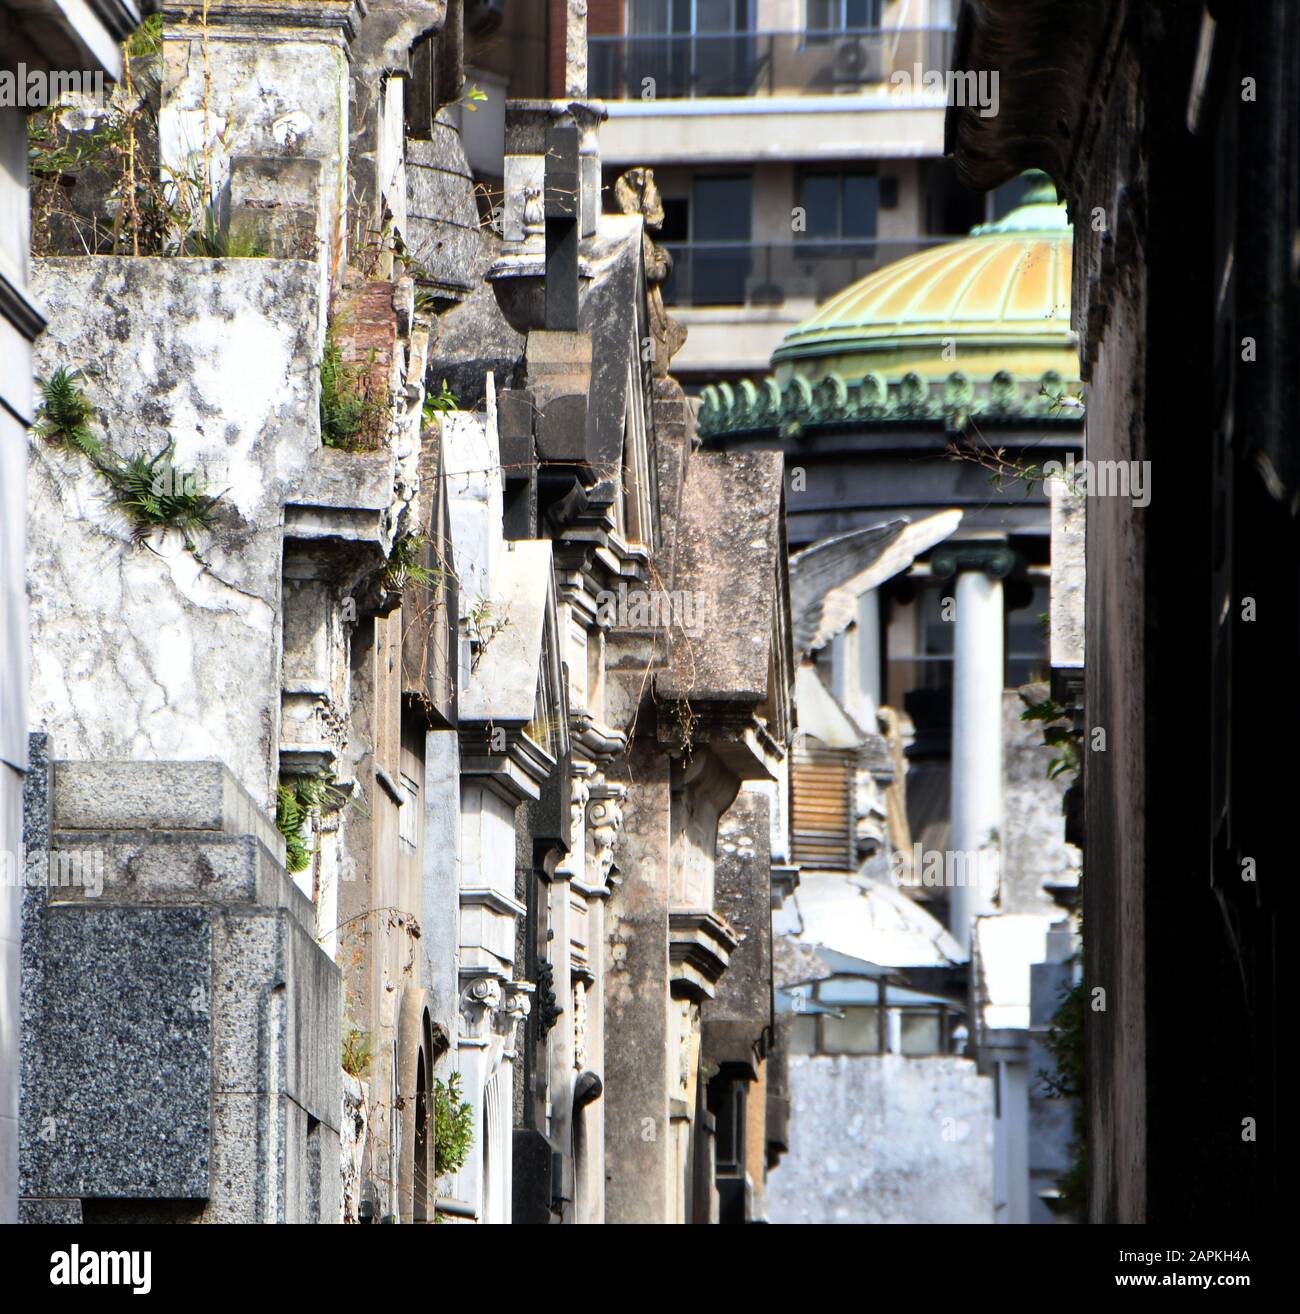 Buenos Aires, Argentina. 1st Mar, 2019. The Cementerio de la Recoleta, or Recoleta Cemetery, is one of Buenos Aires's most popular tourist destinations. Many of Argentina's luminaries are buried in granite and bronze mausoleums. Photos Friday March 1, 2019 Credit: Mark Hertzberg/ZUMA Wire/Alamy Live News Stock Photo